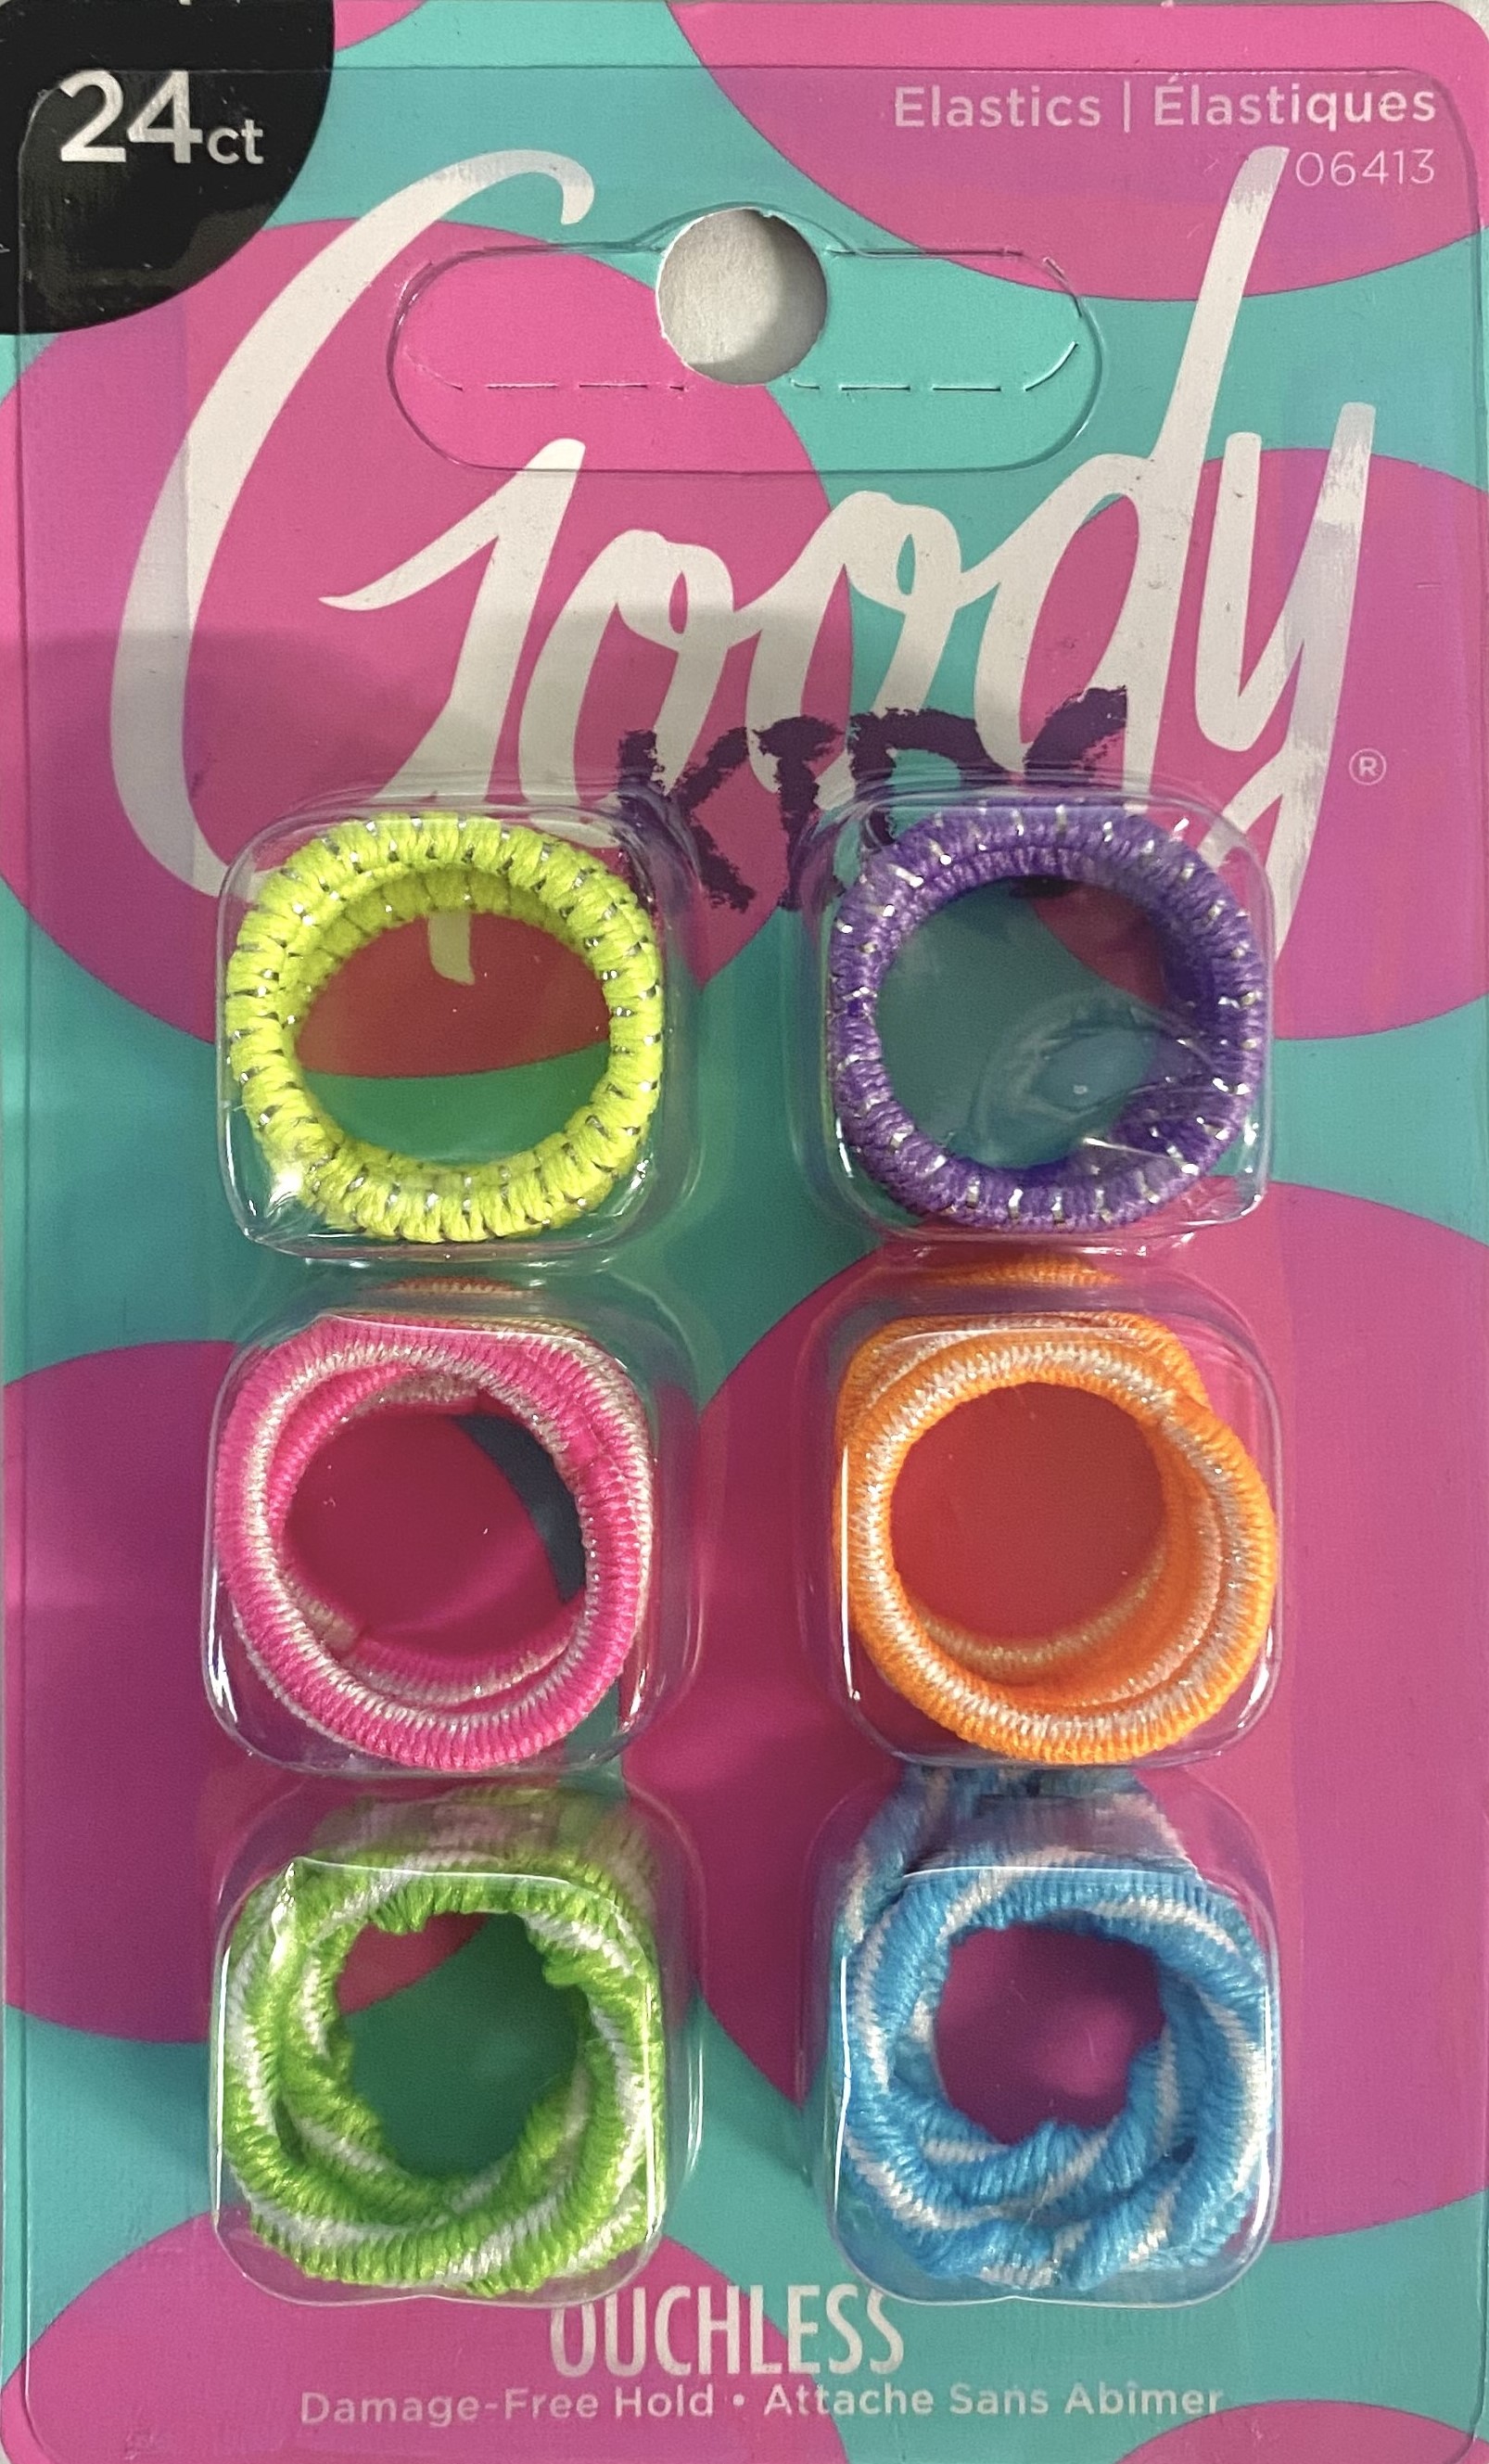 GOODY OUCHLESS KIDS ELASTICS IN TRAY UPC:041457064139